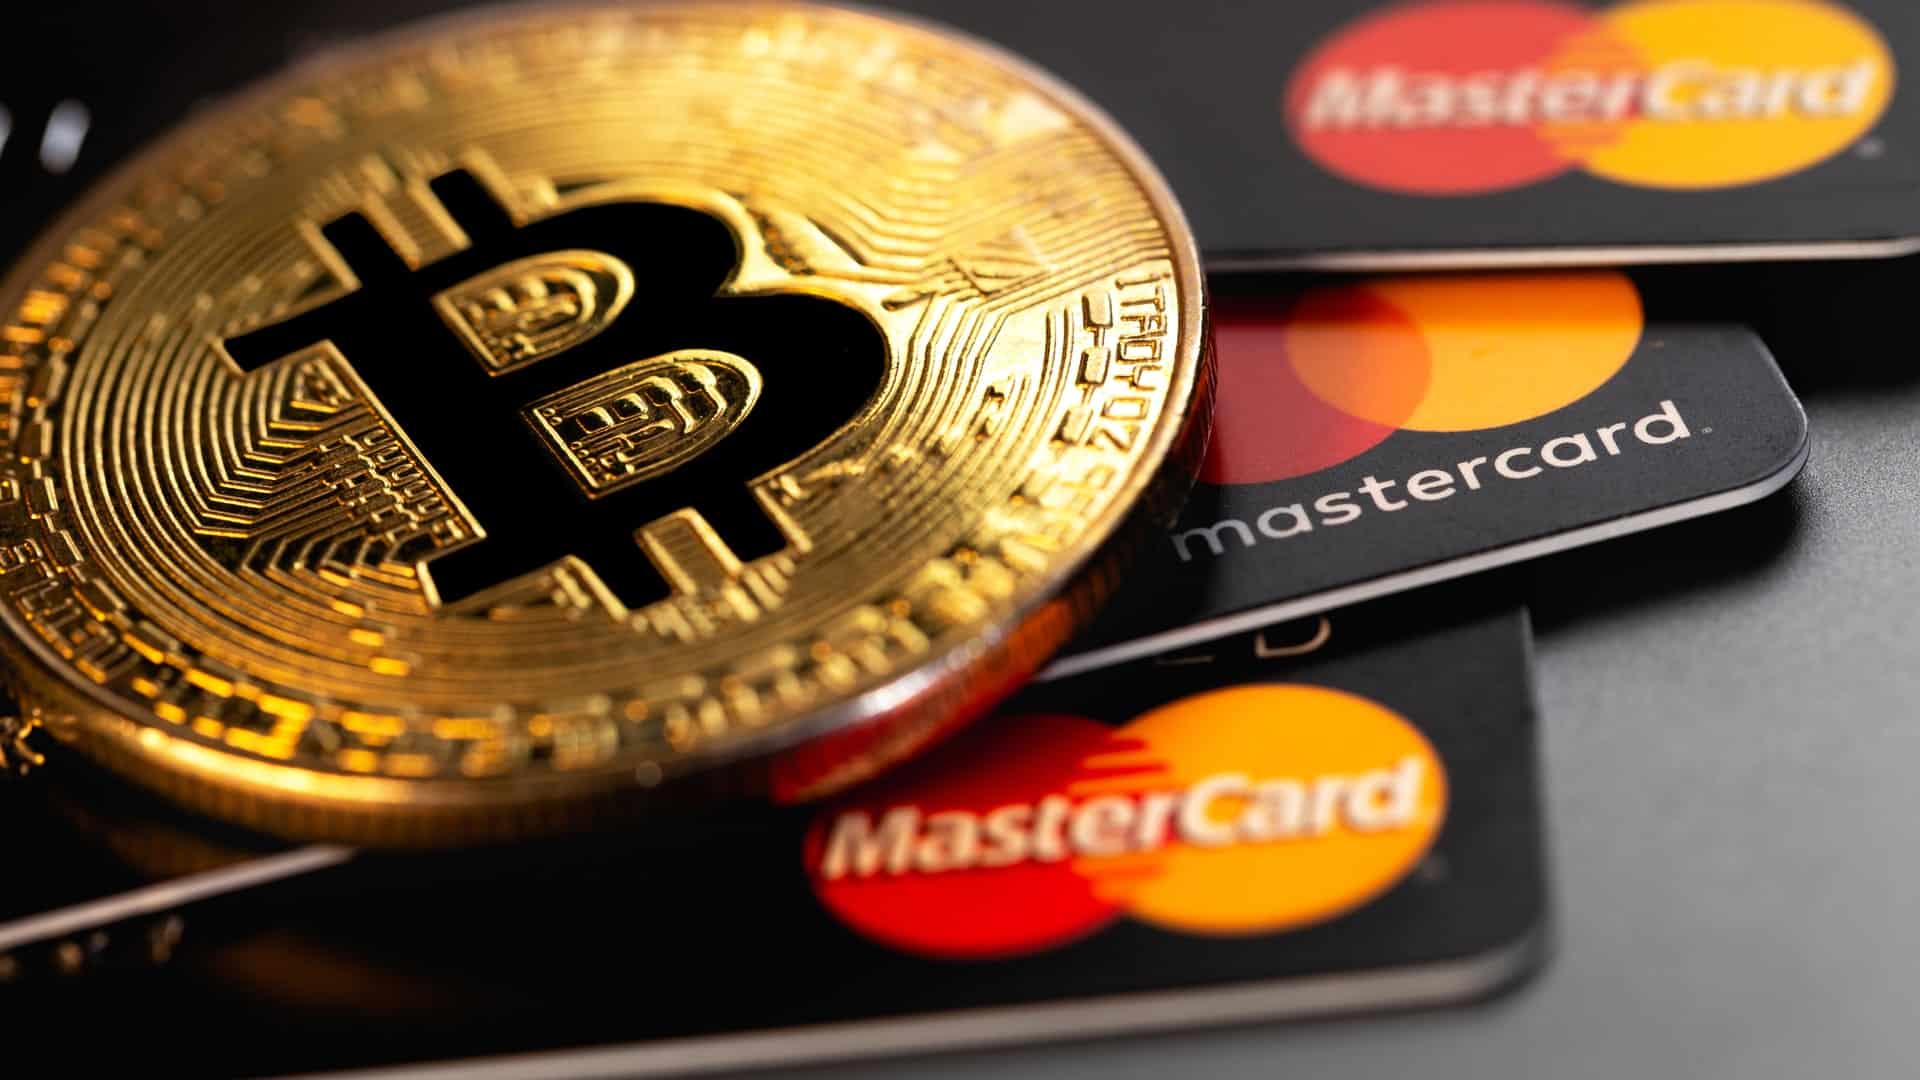 Mastercard is preparing a network for digital currencies of central banks